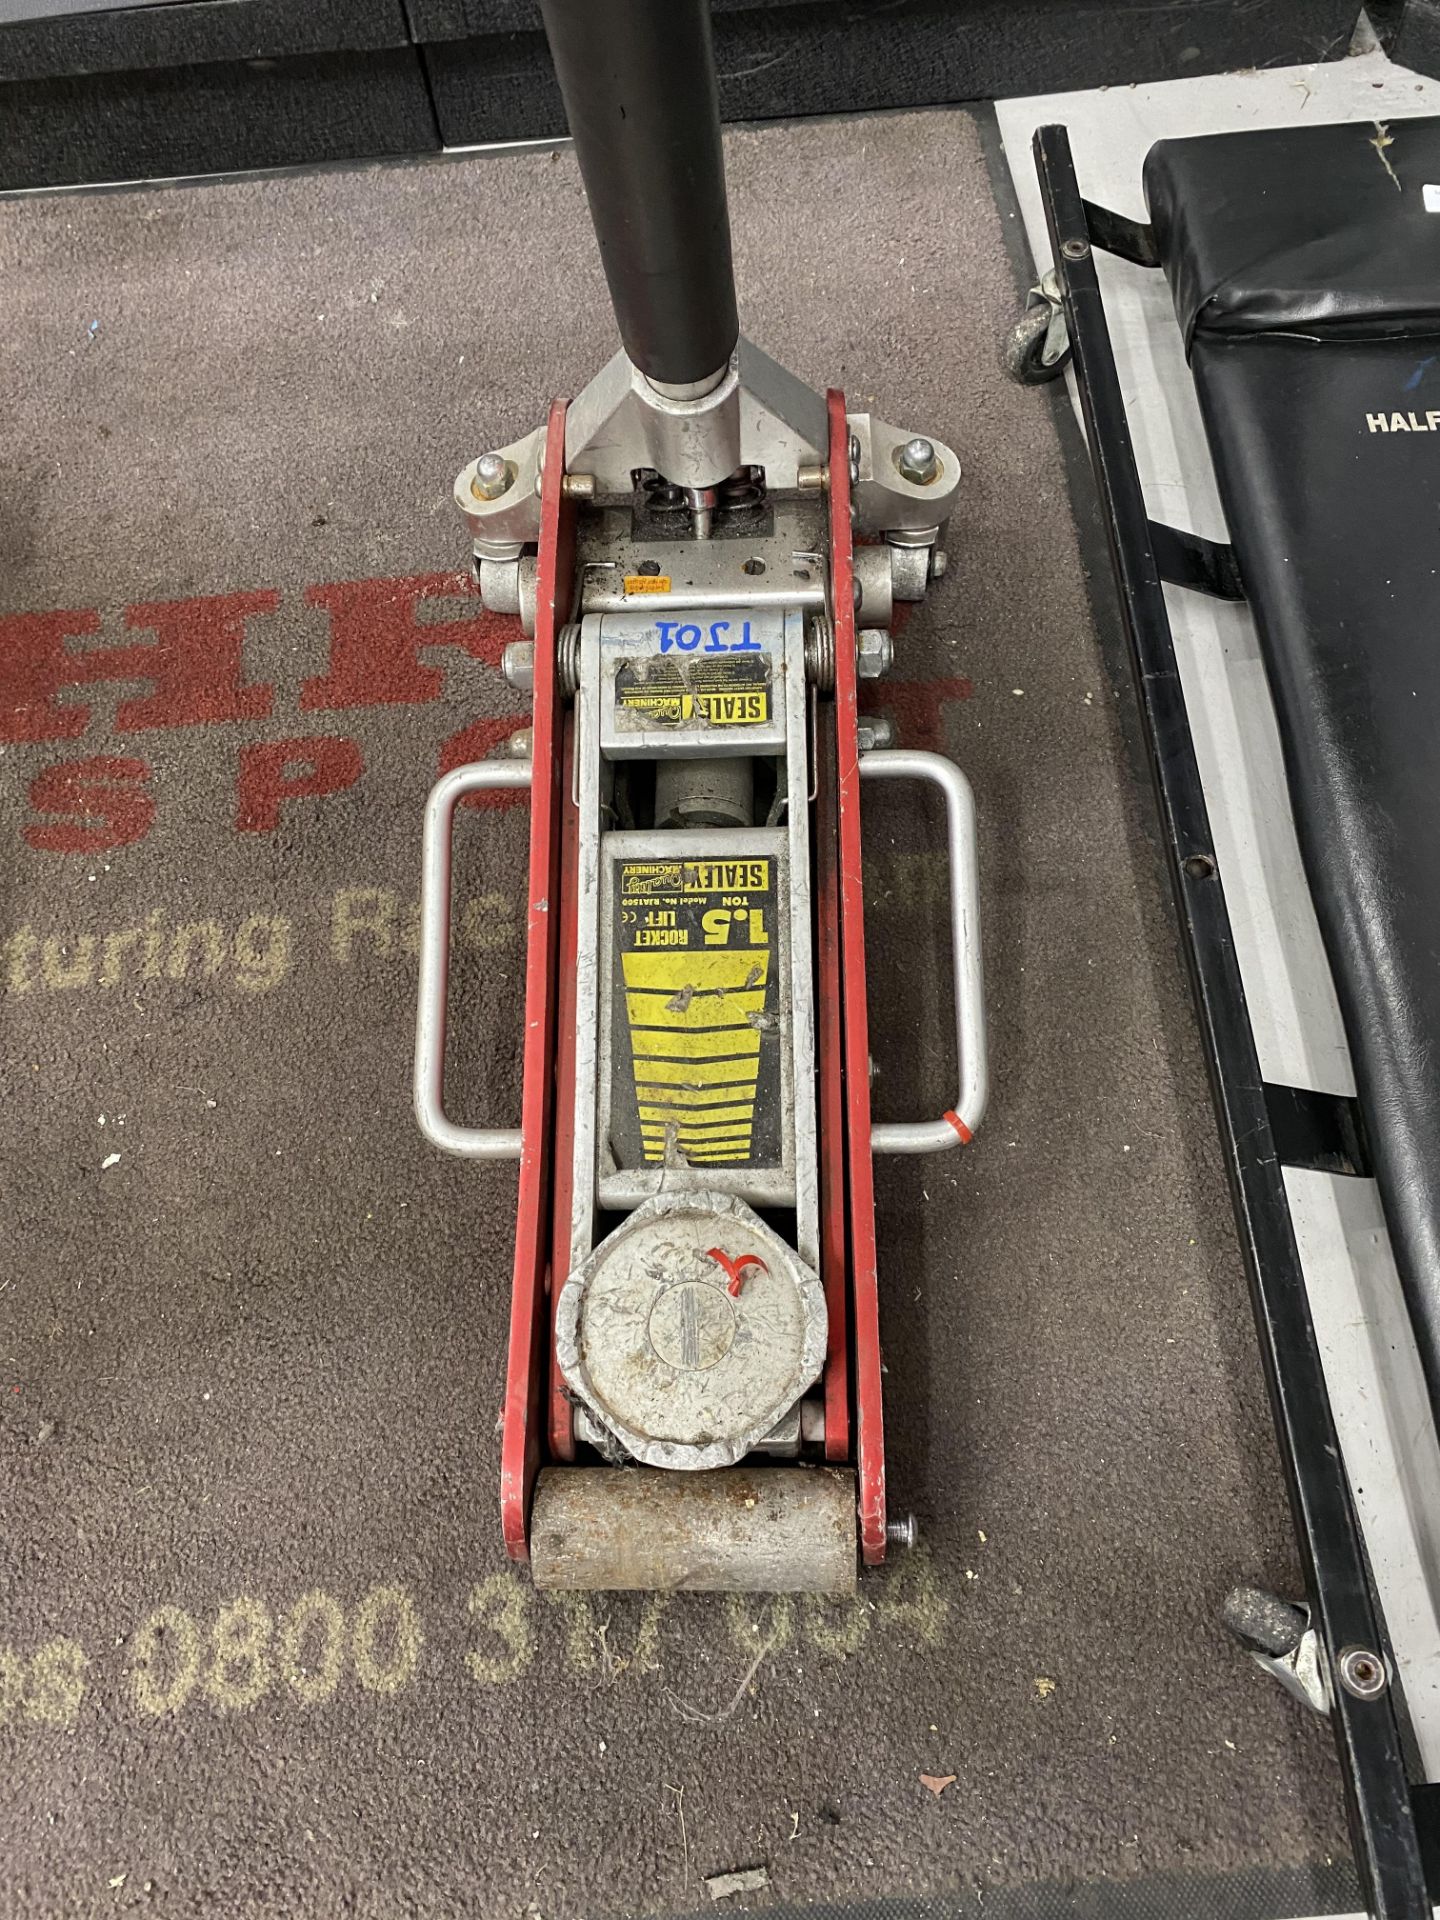 Sealey RJA1500 1.5 tonne hydraulic trolley jack and a Halfords mobile crawler board. - Image 2 of 4